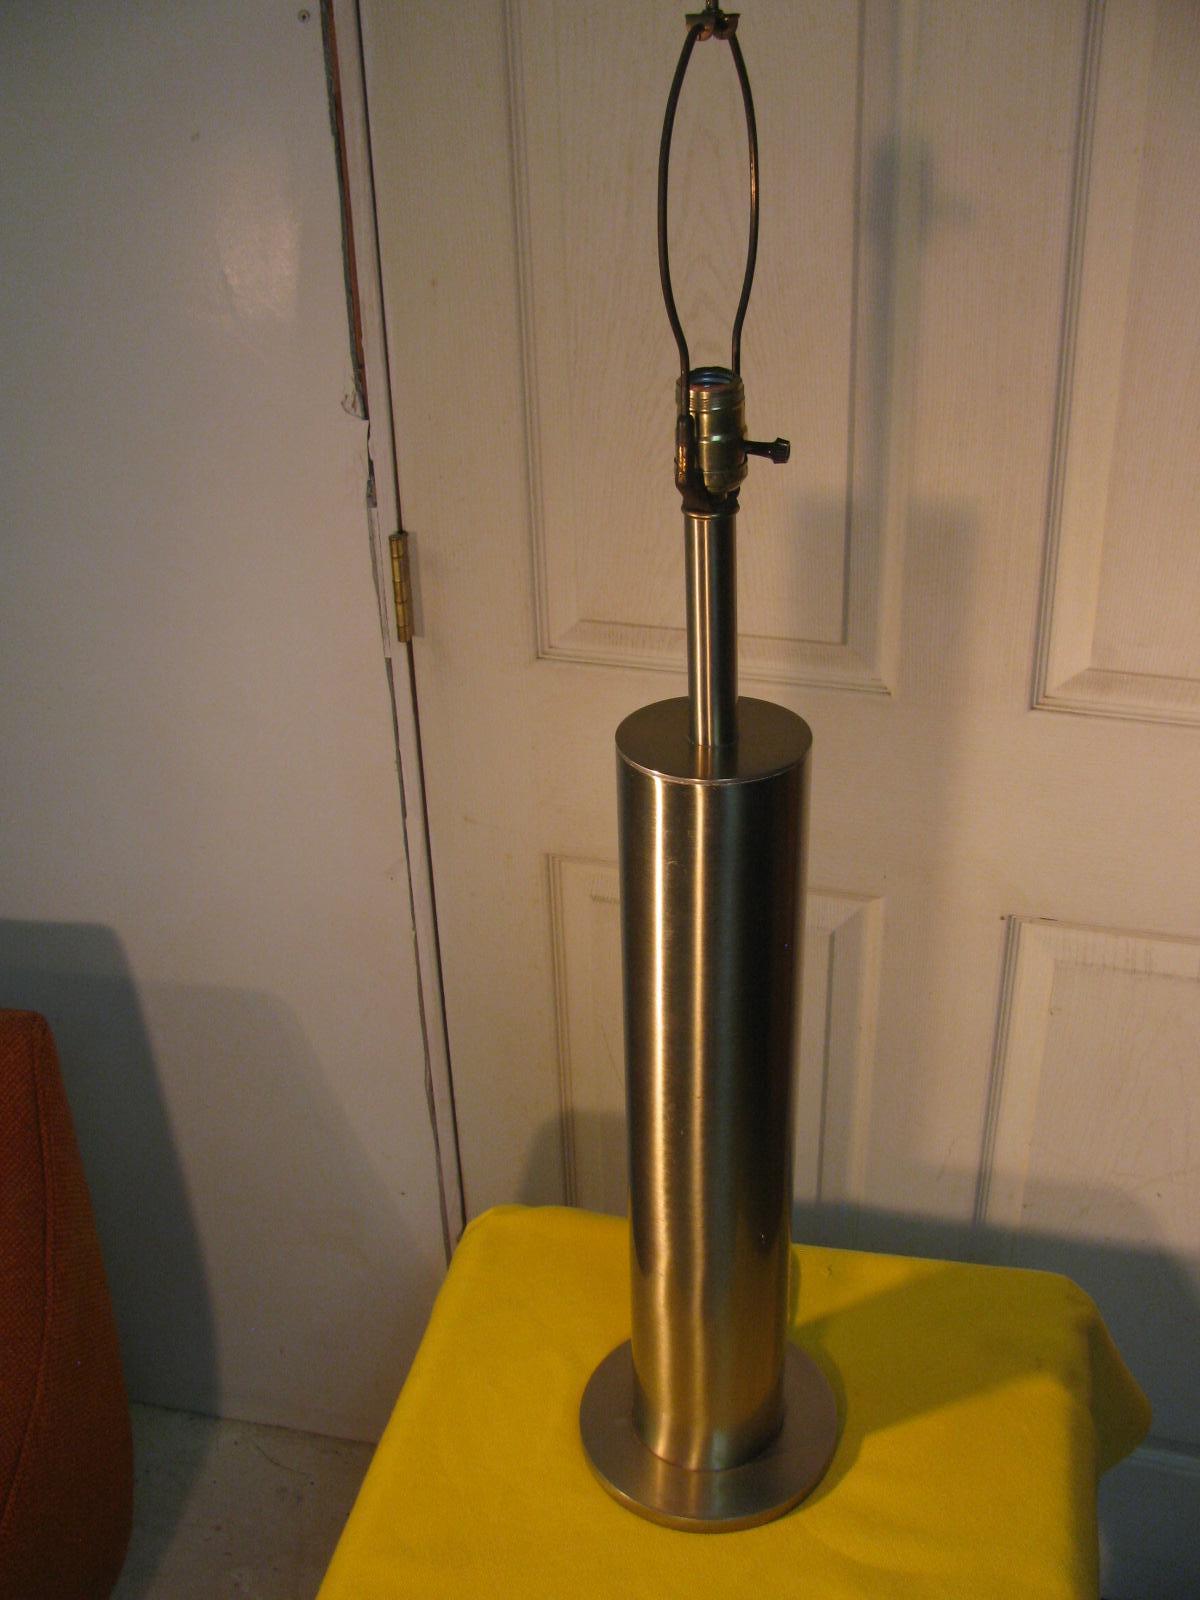 Pair of Mid-Century Modern Stainless Steel Cylindrical Table Lamps In Good Condition For Sale In Port Jervis, NY